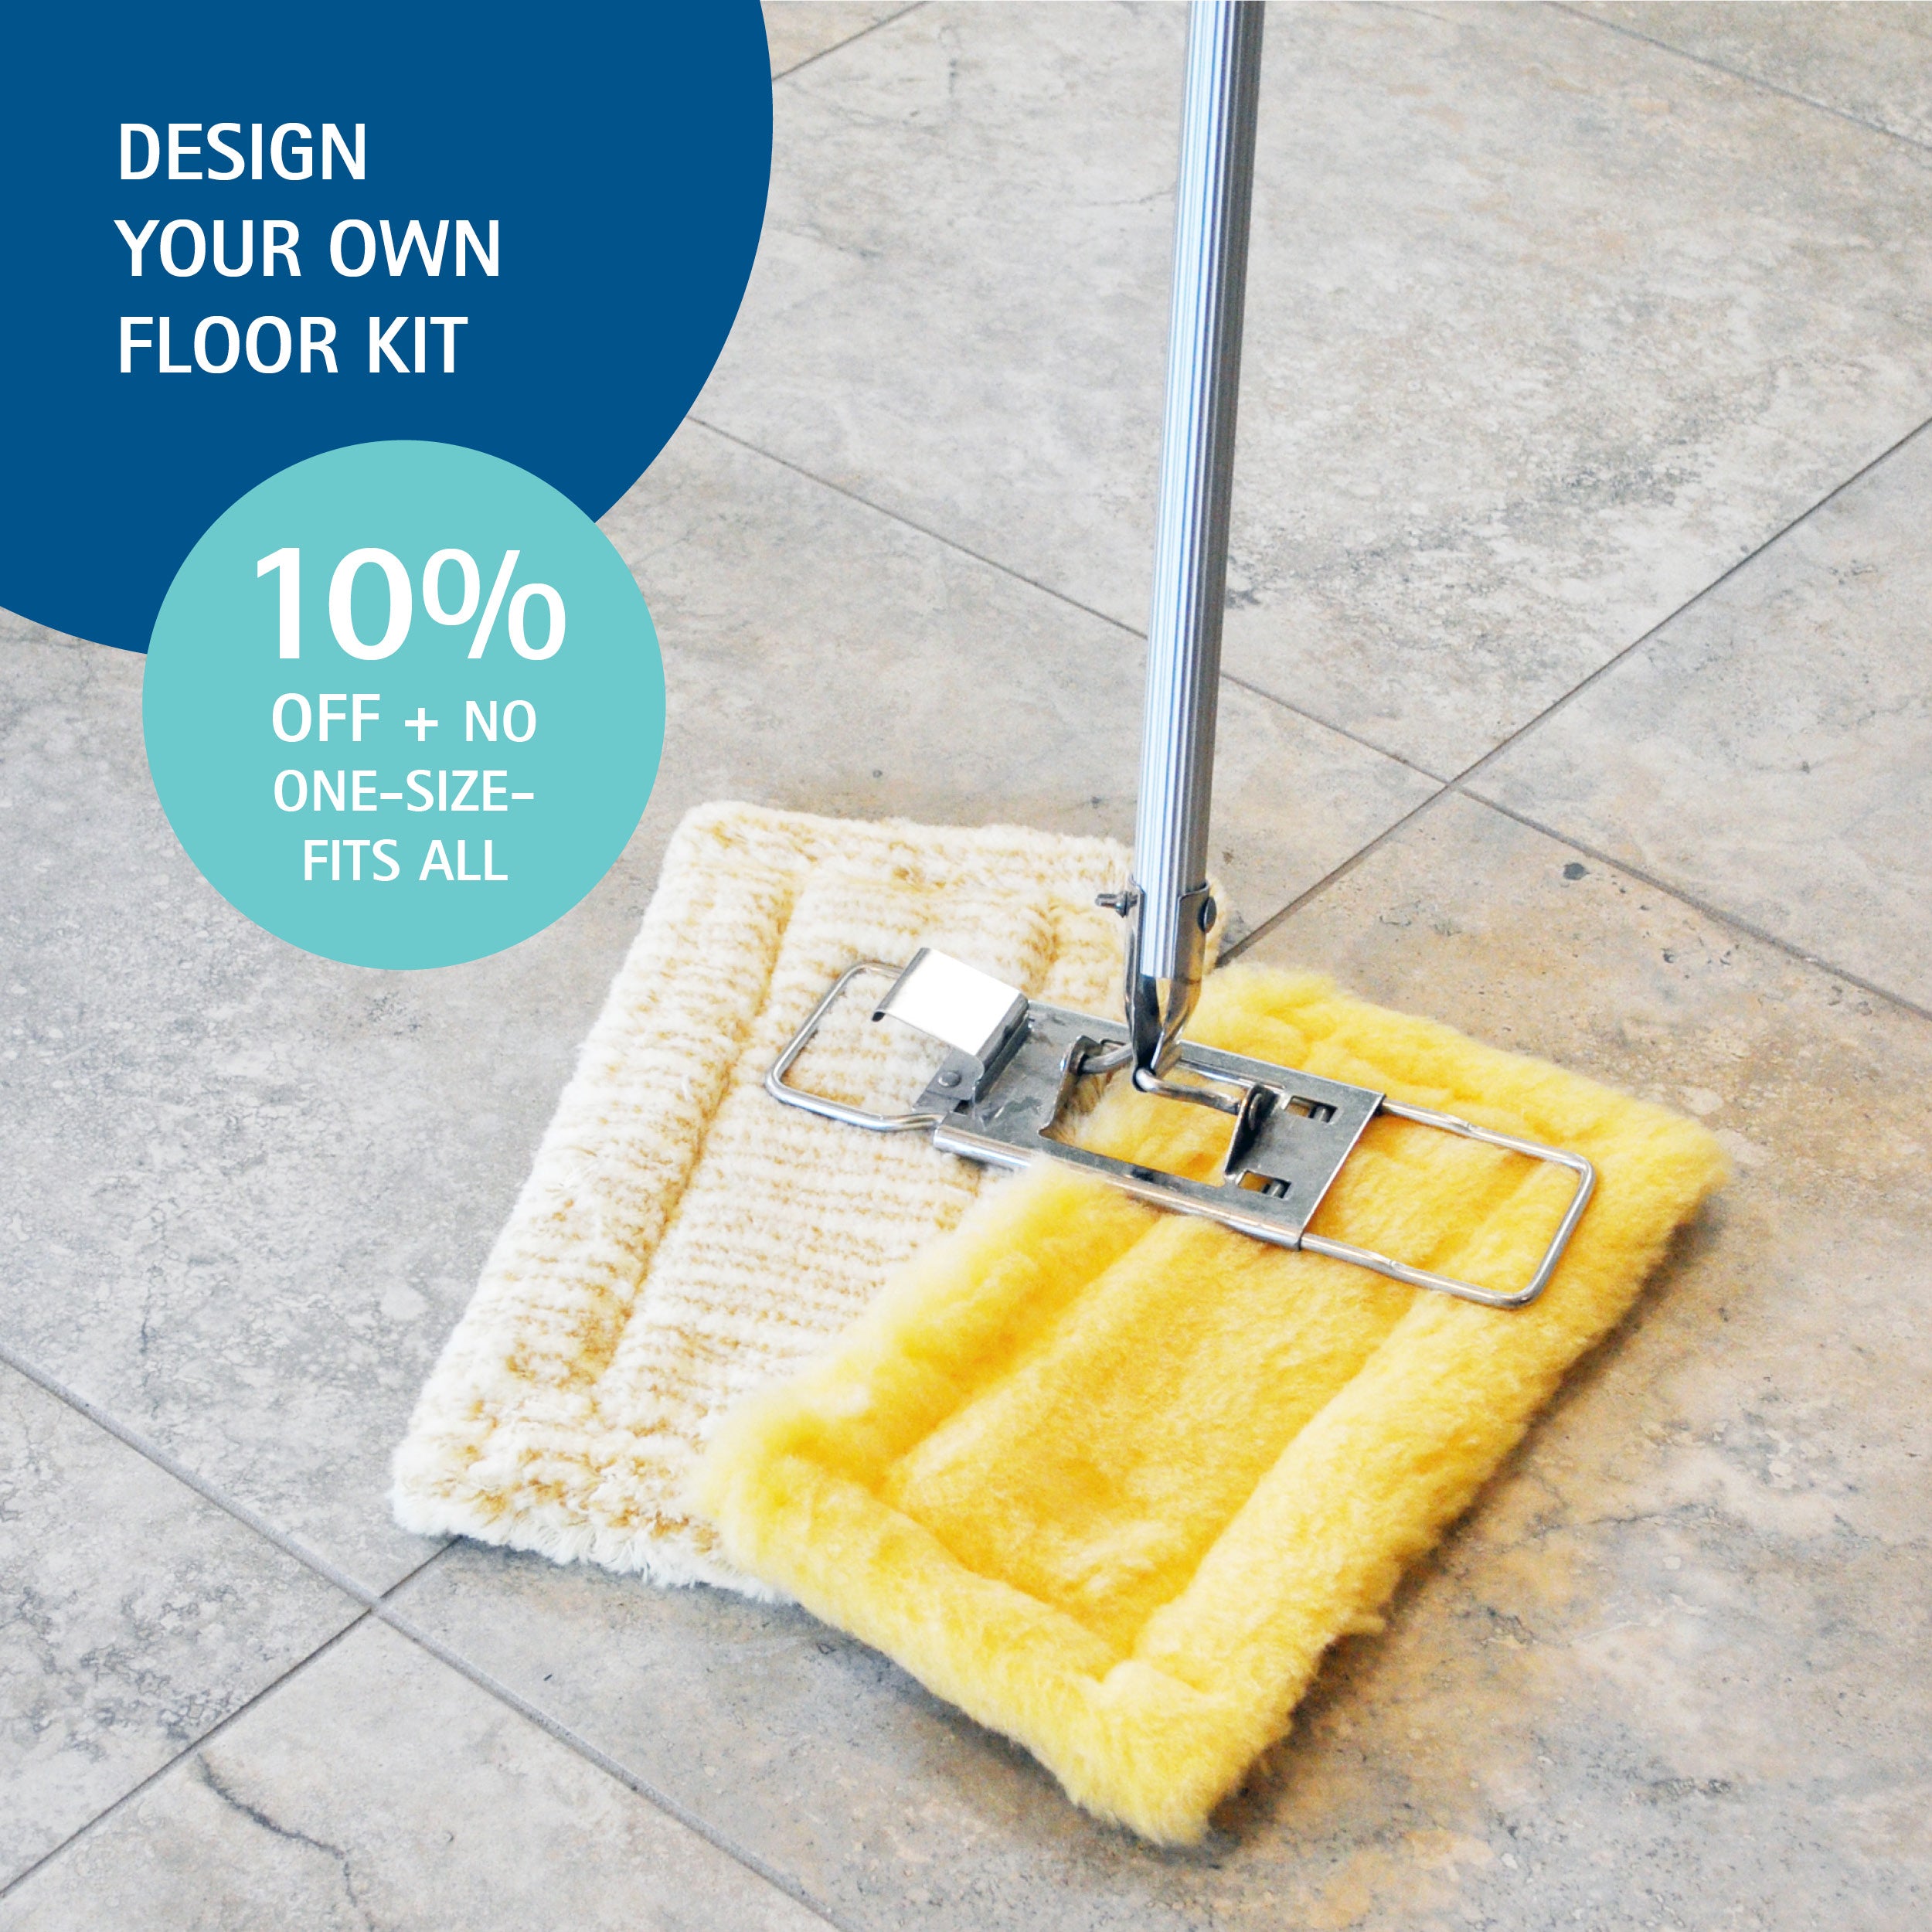 No one-size-fits-all: Design your own floor mop!